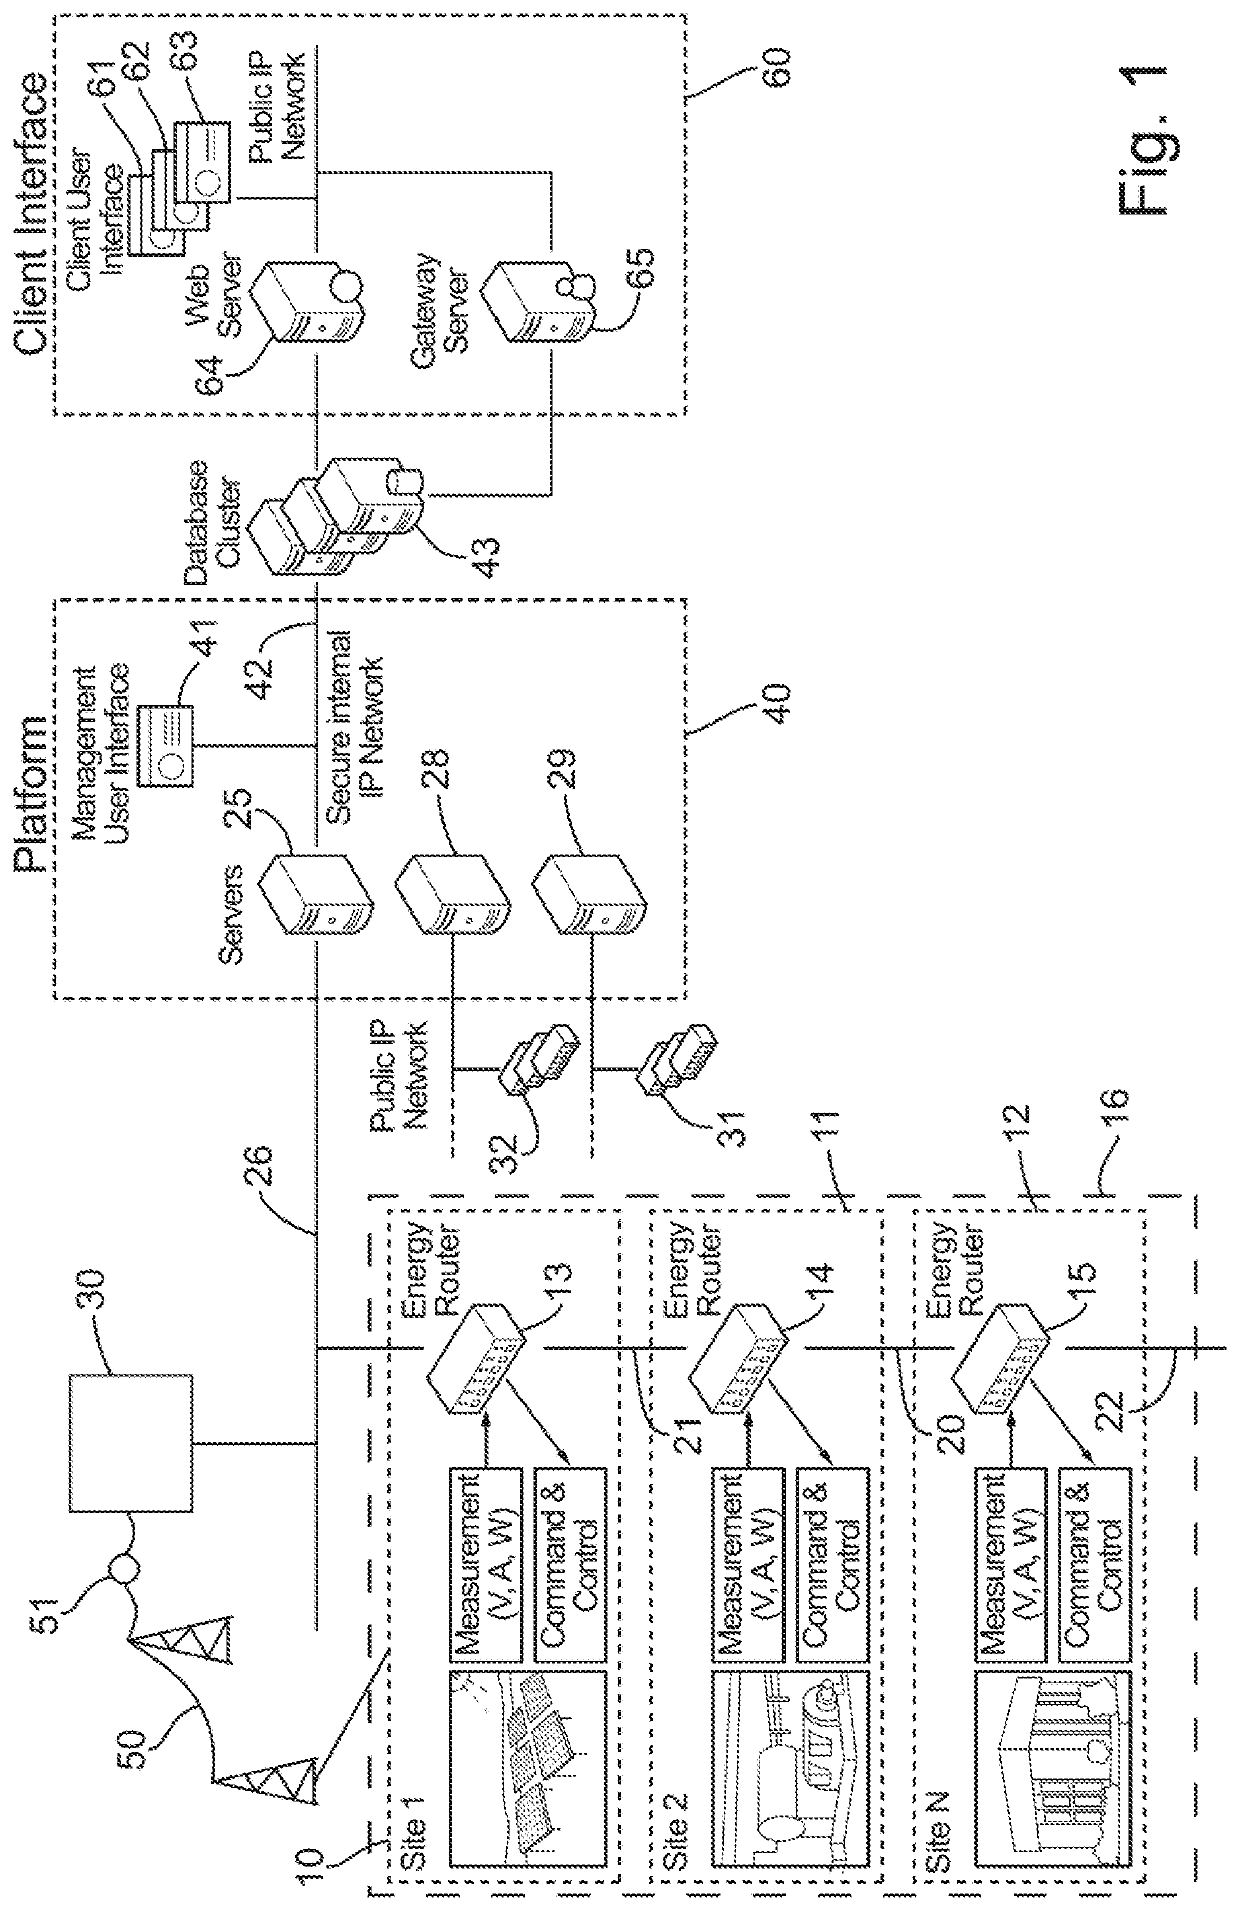 Power distribution control with asset assimilation and optimization